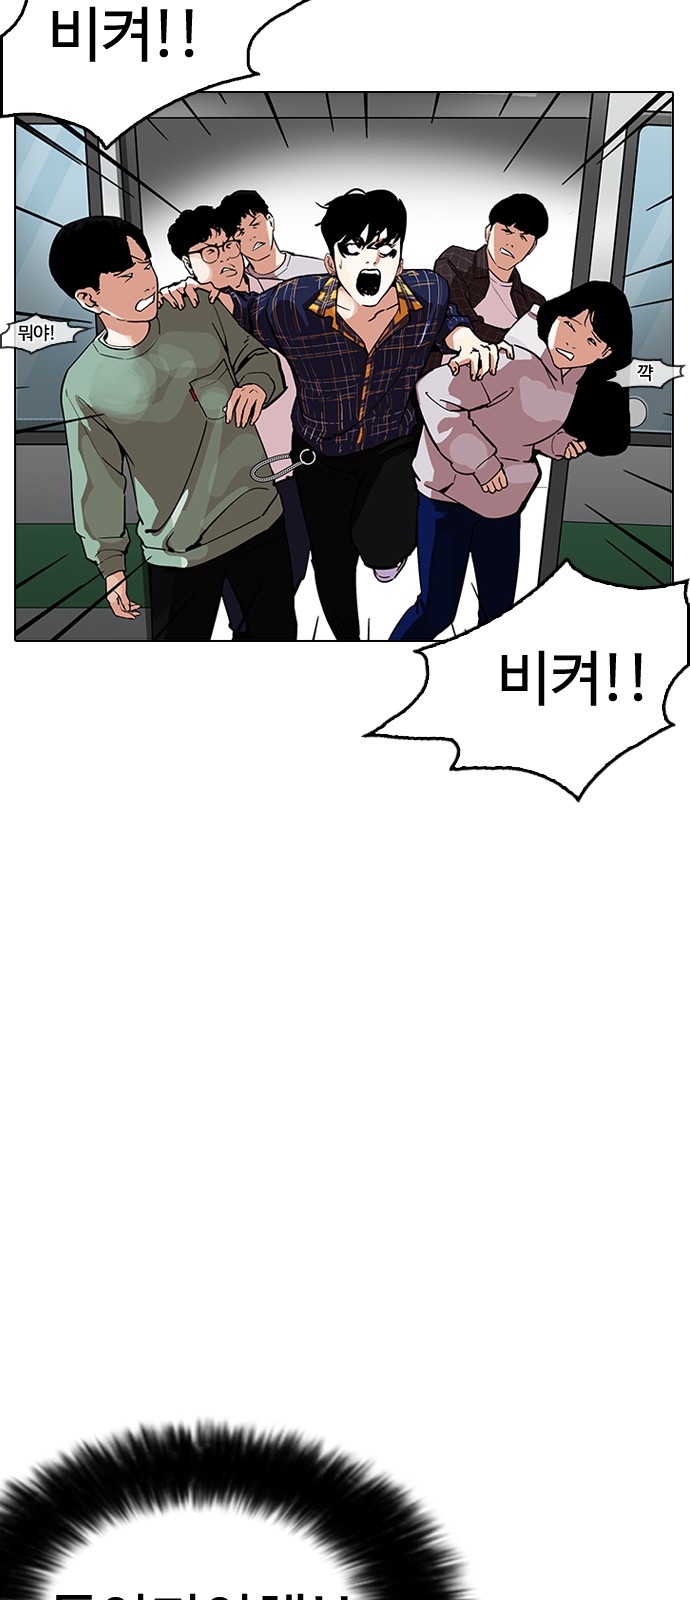 Lookism - Chapter 187 - Page 2